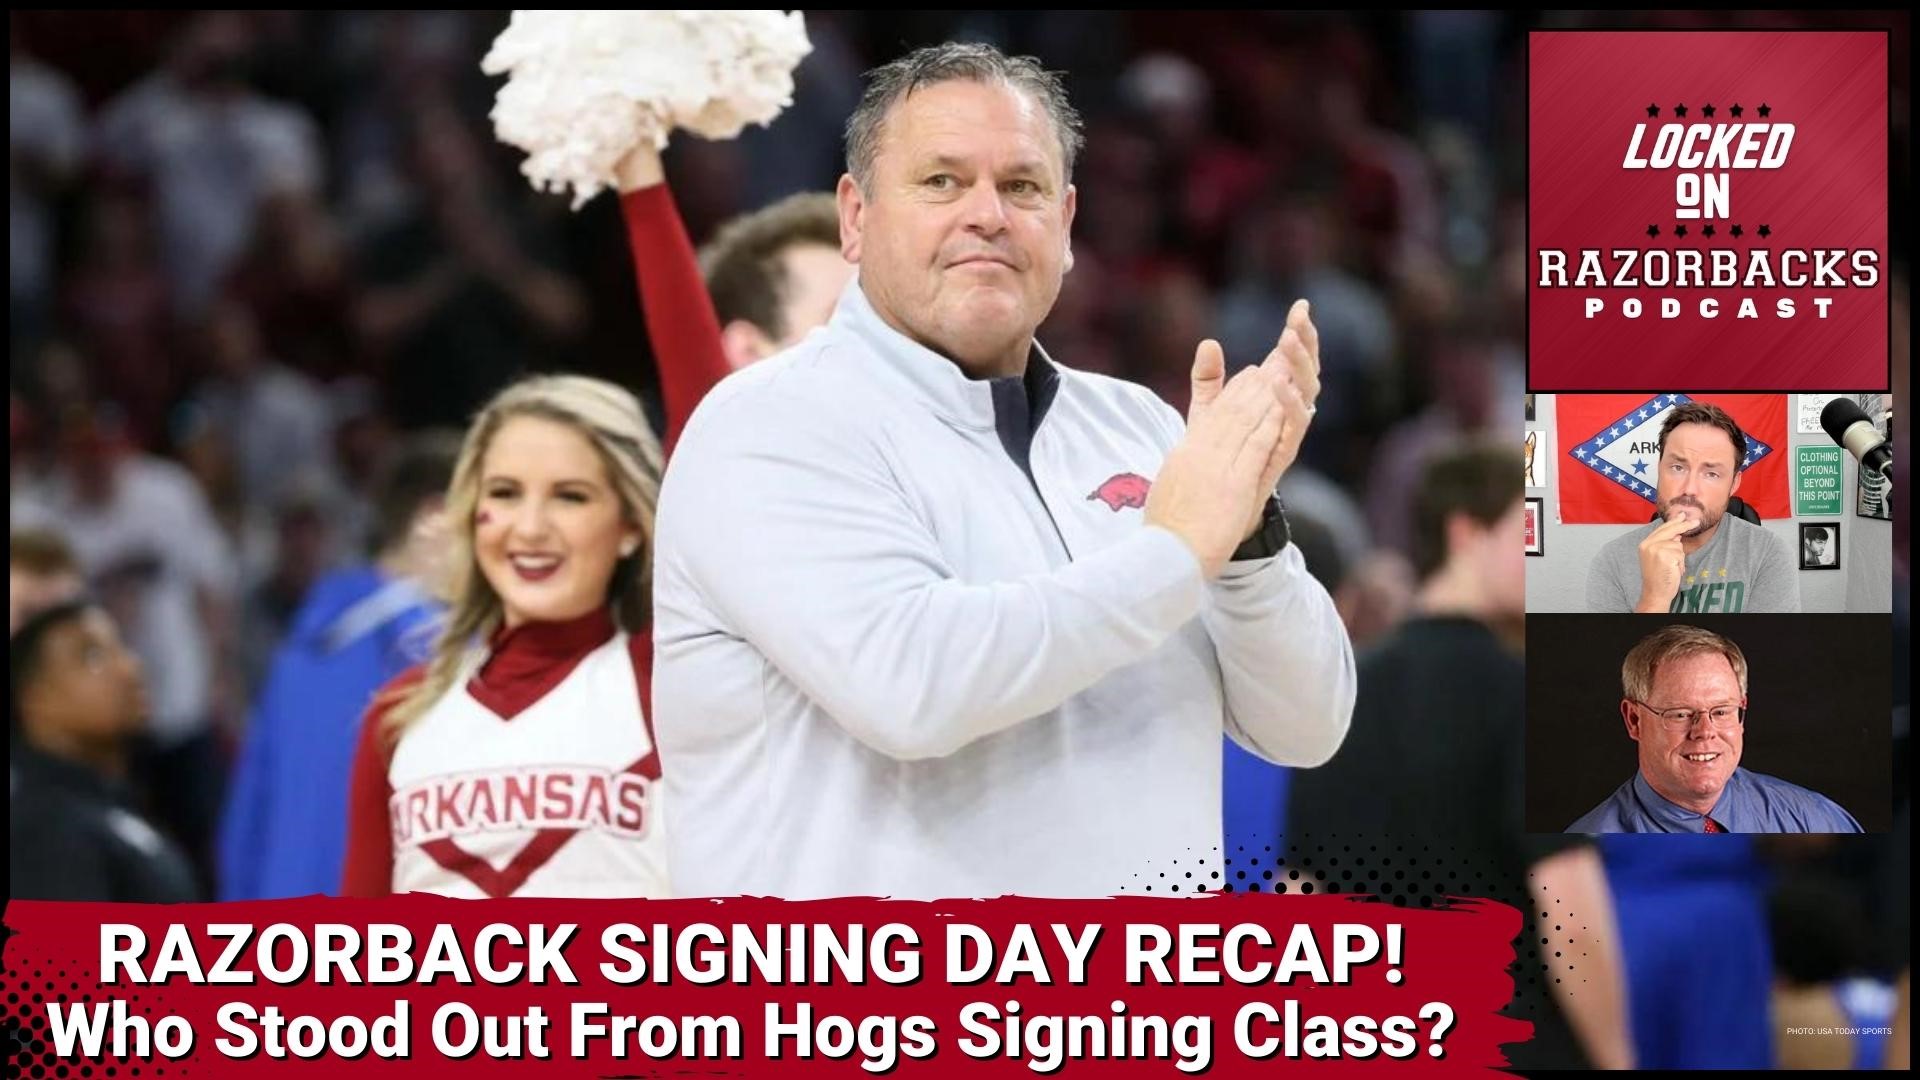 The 2023 Razorback Football Signing Class has officially been signed. So which of the new players coming in will help Arkansas the most in 2023 and beyond?